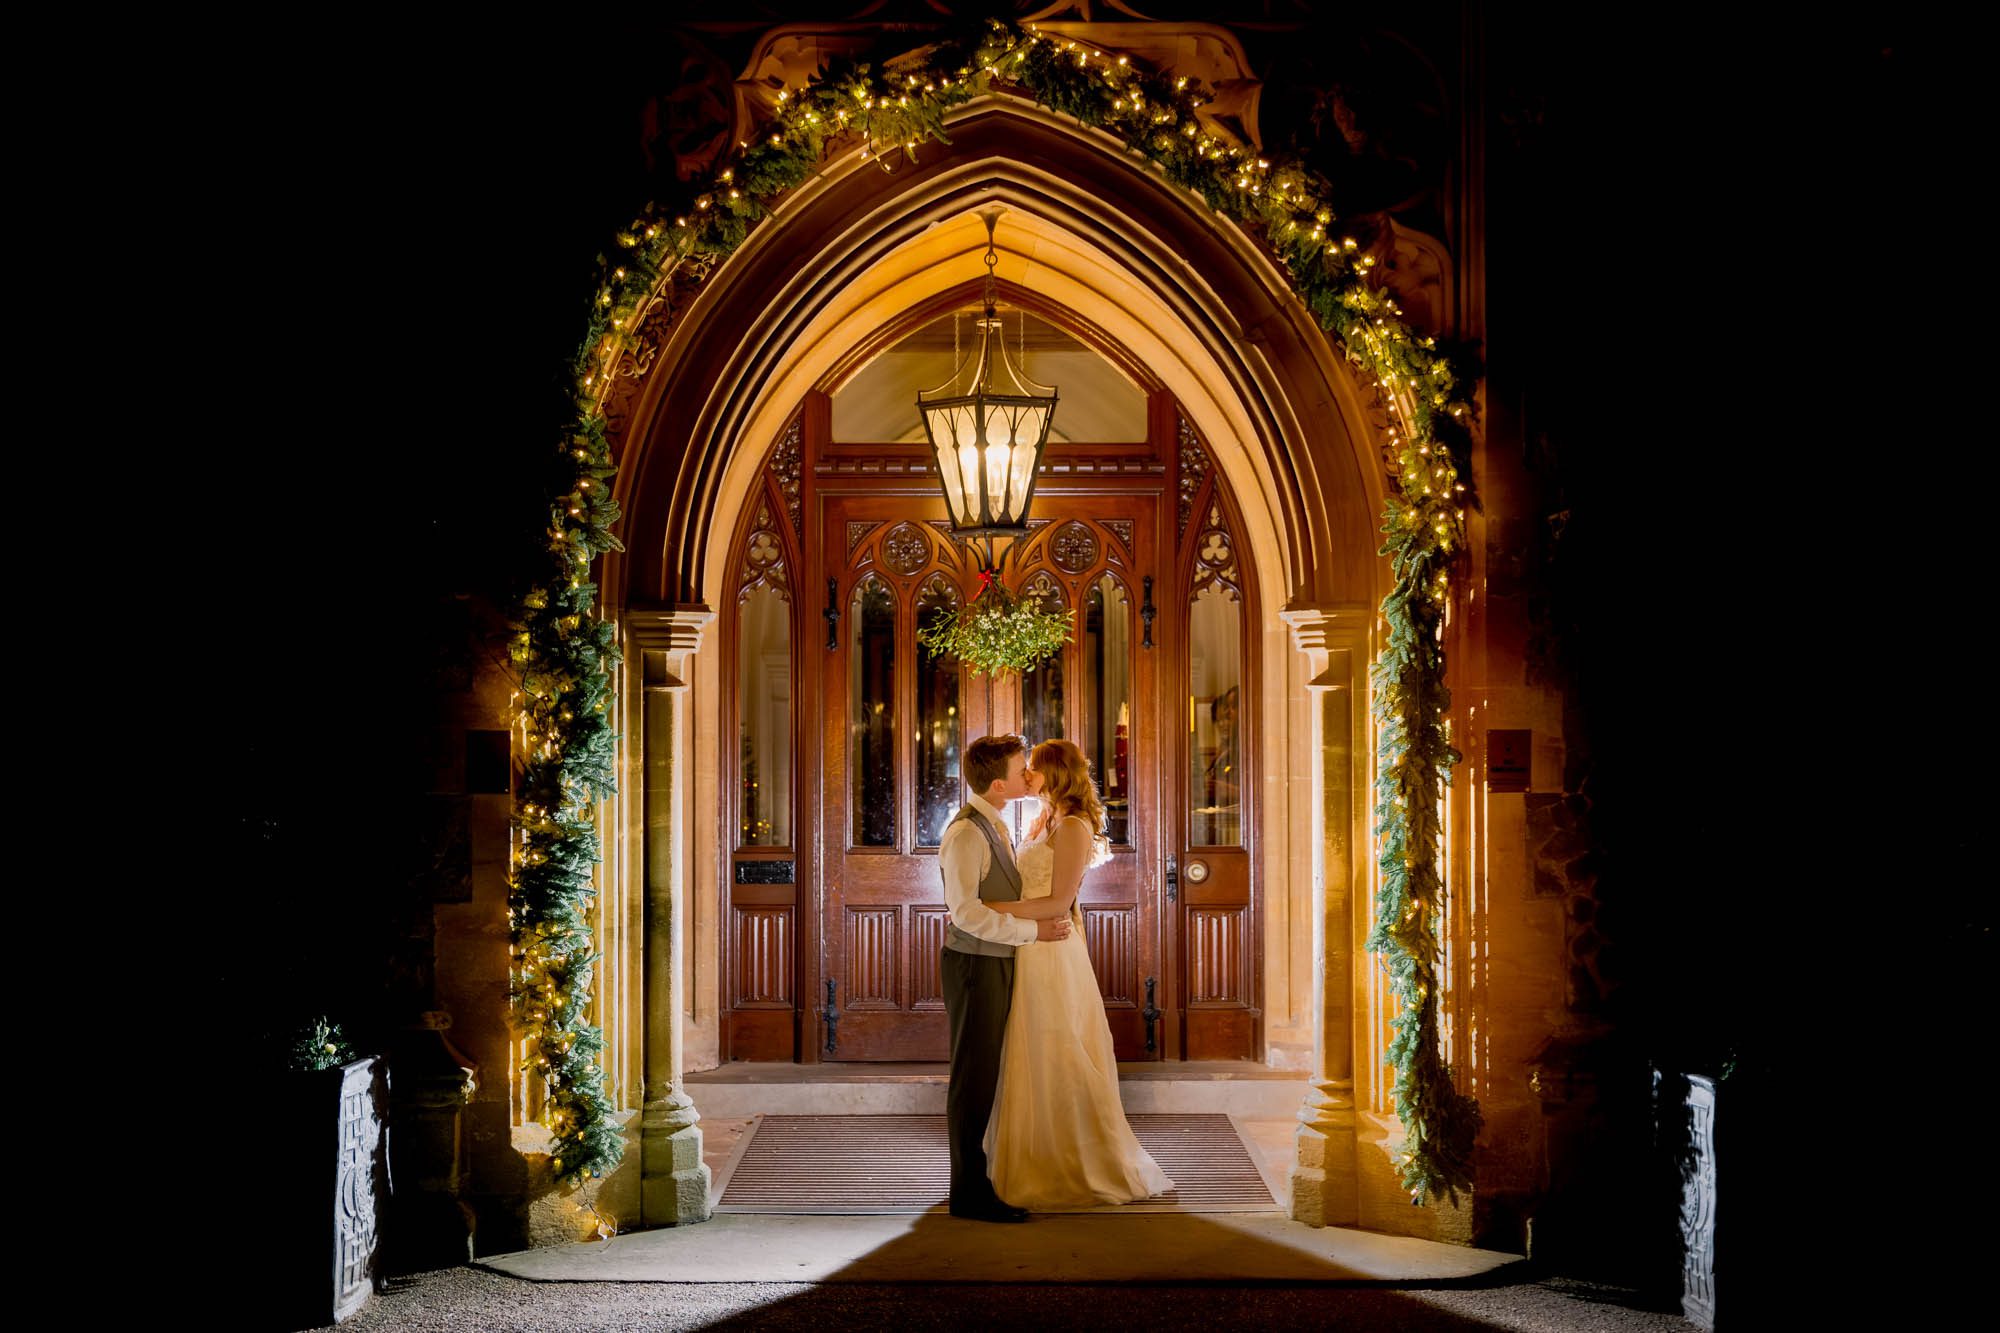 Bride and groom kiss on their wedding day at Nutfield Priory Wedding Venue in Surrey